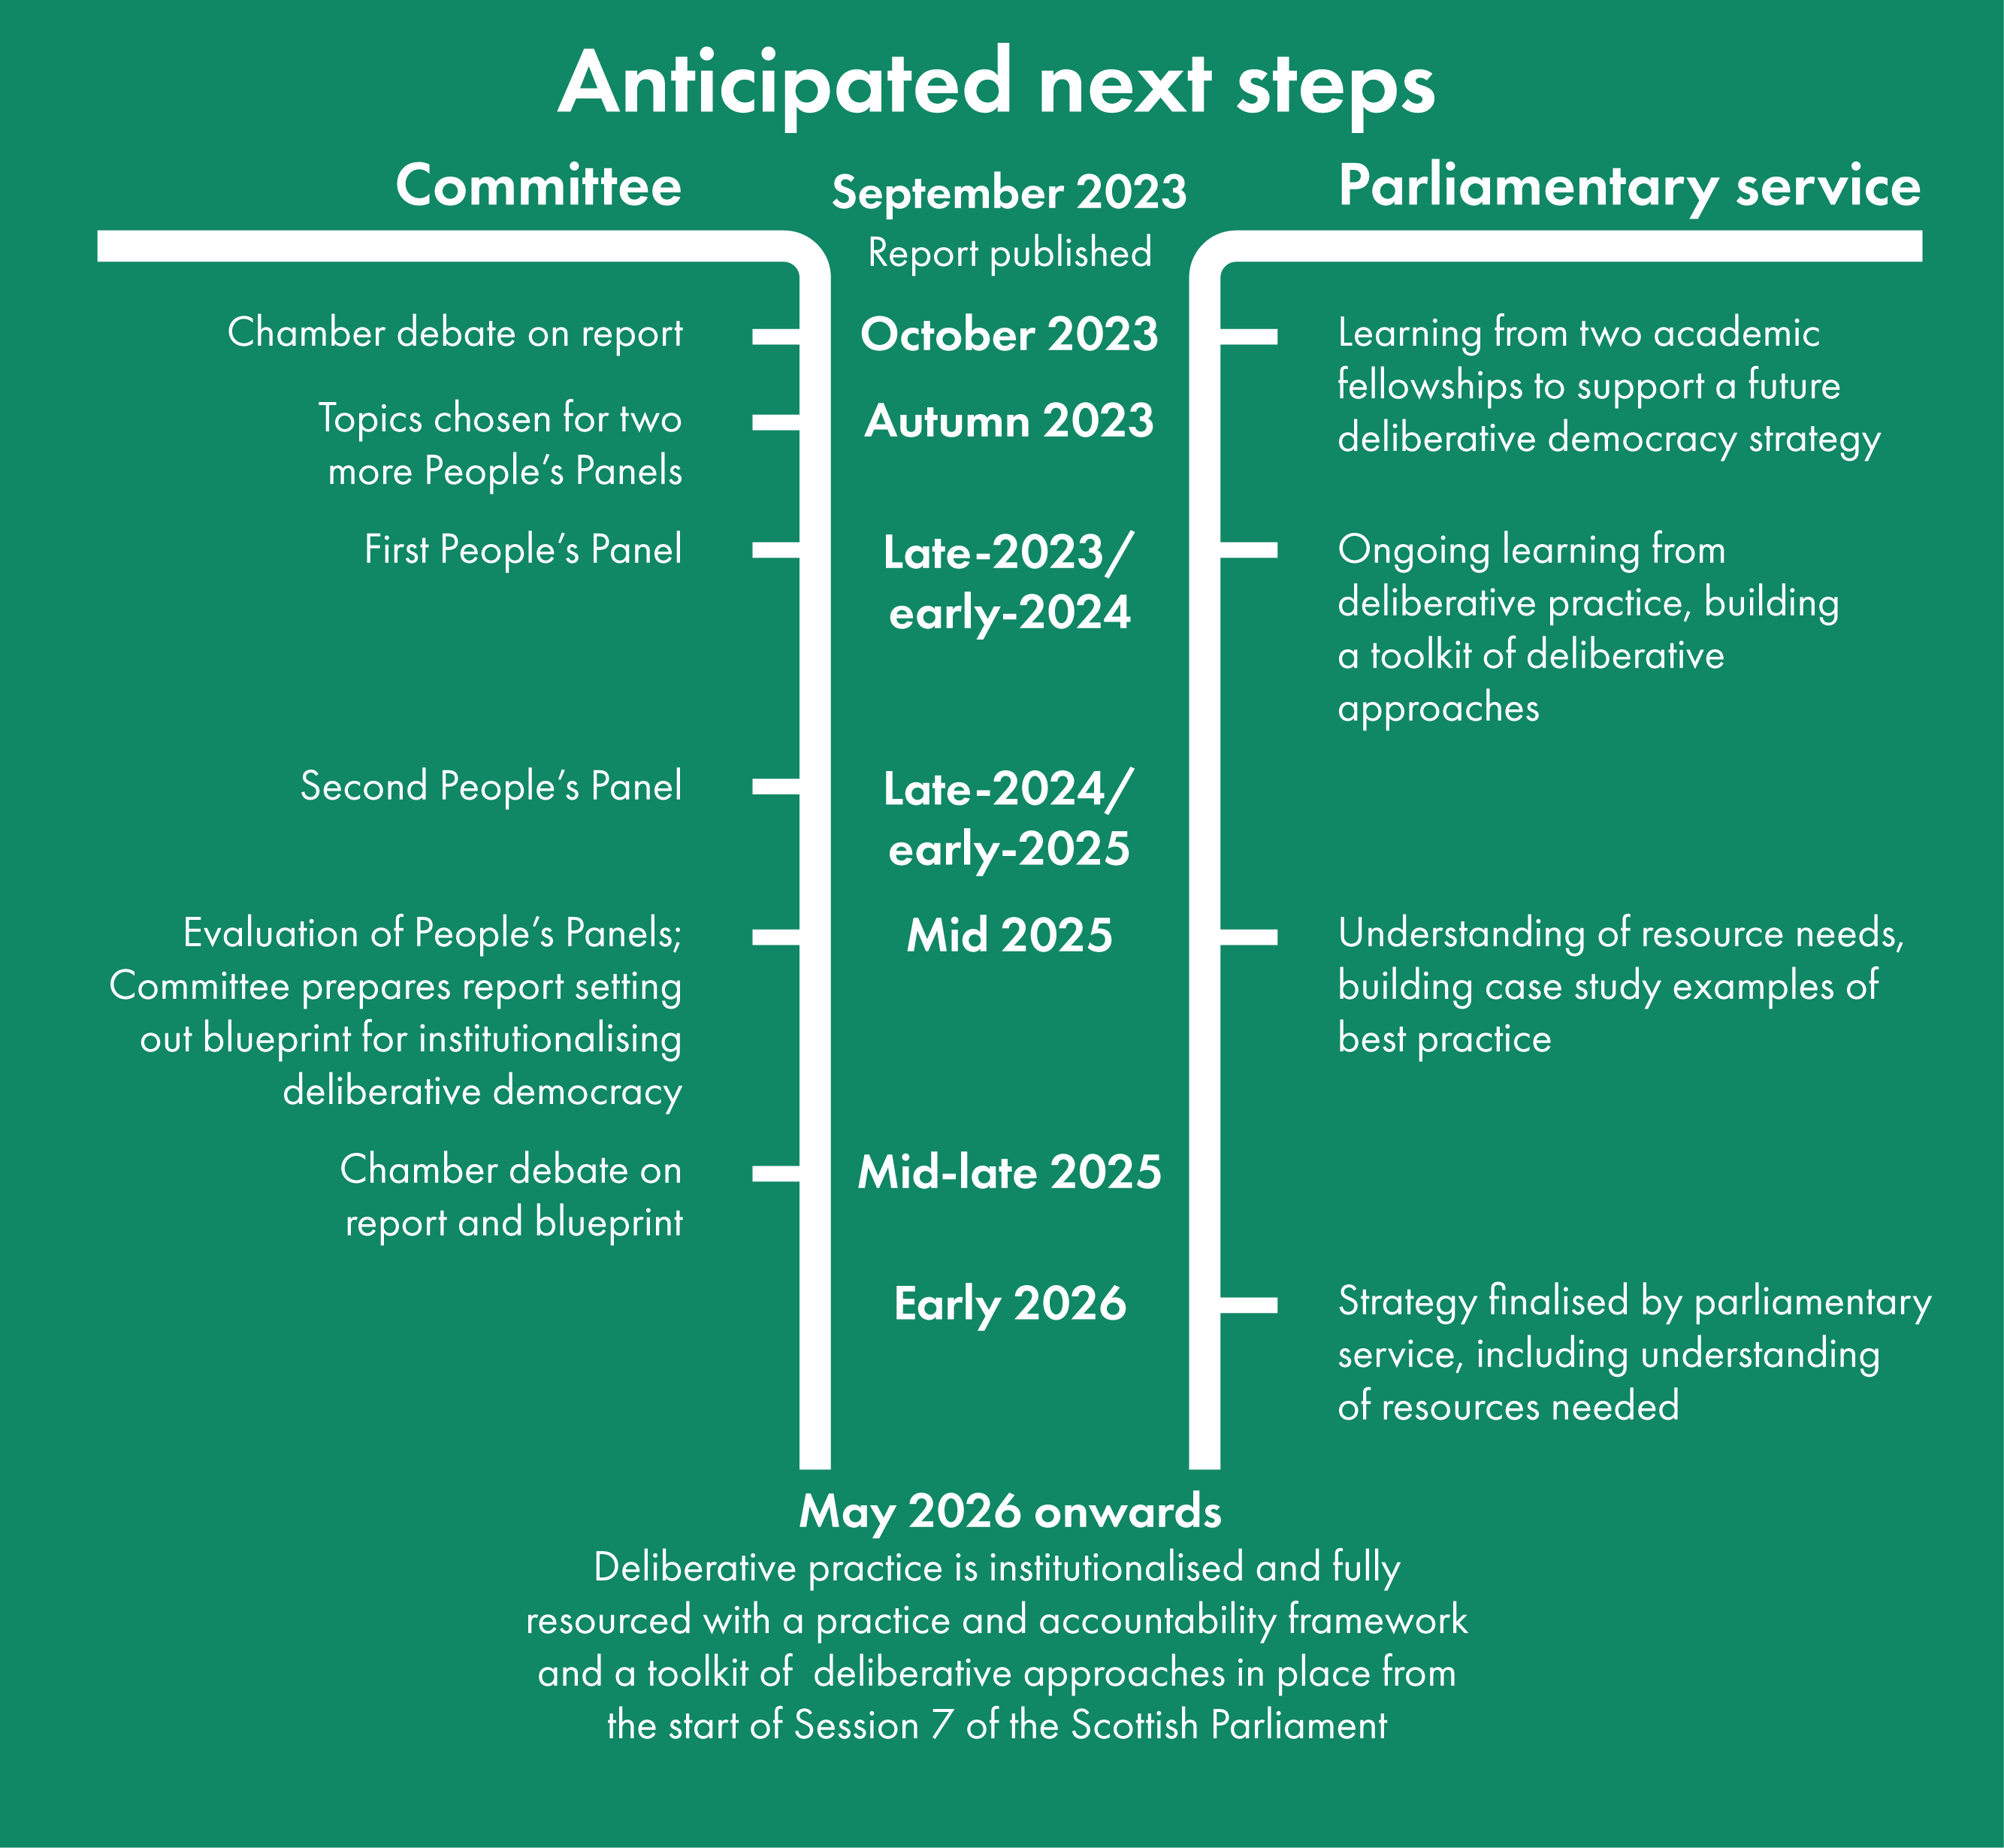 A timeline of the anticipated next steps of the People's panels recommendations. Chamber debate on this report, along with learning from two academic fellowships to support a future deliberative democracy strategy, October 2023. Topics chosen for two more People’s panels in Autumn 2023. Seconds People’s panel planned for late 2024/ early 2025. Mid 2025 there will be an evaluation of People’s panel; Committees to prepare report setting out blueprint for institutionalising deliberative democracy along with parliament services understanding of resources needs, building case study examples of best practice. Mid to late 2025t here will be a chamber debate on report and blueprint and in early 2026 there will be strategy finalised by parliamentary service, including understanding of resources needed. From May 2026 onwards there will be a deliberative practice institutionalised and fully resourced with a practice and accountability framework and a toolkit of deliberative approaches in place from the start on Session 7 of the Scottish Parliament